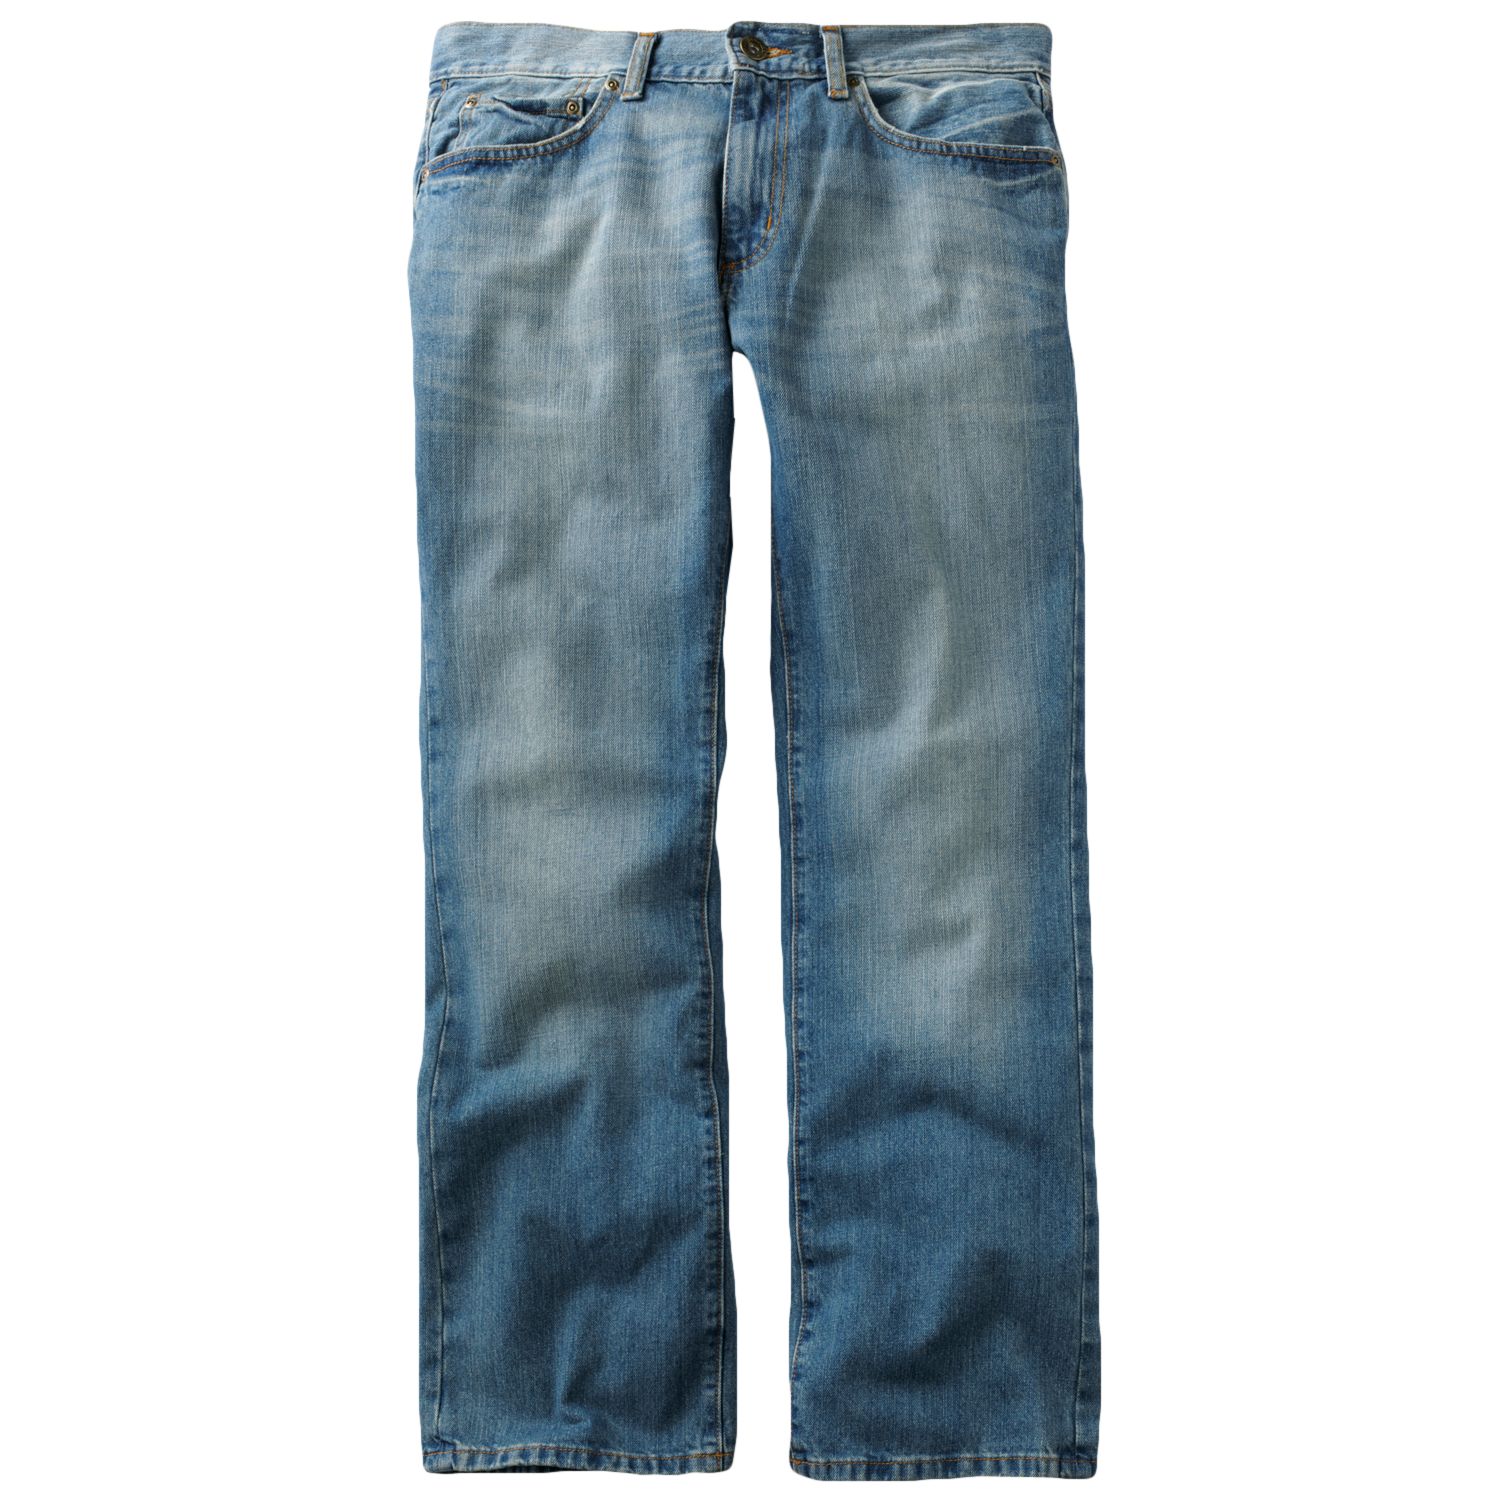 sonoma men's relaxed fit jeans